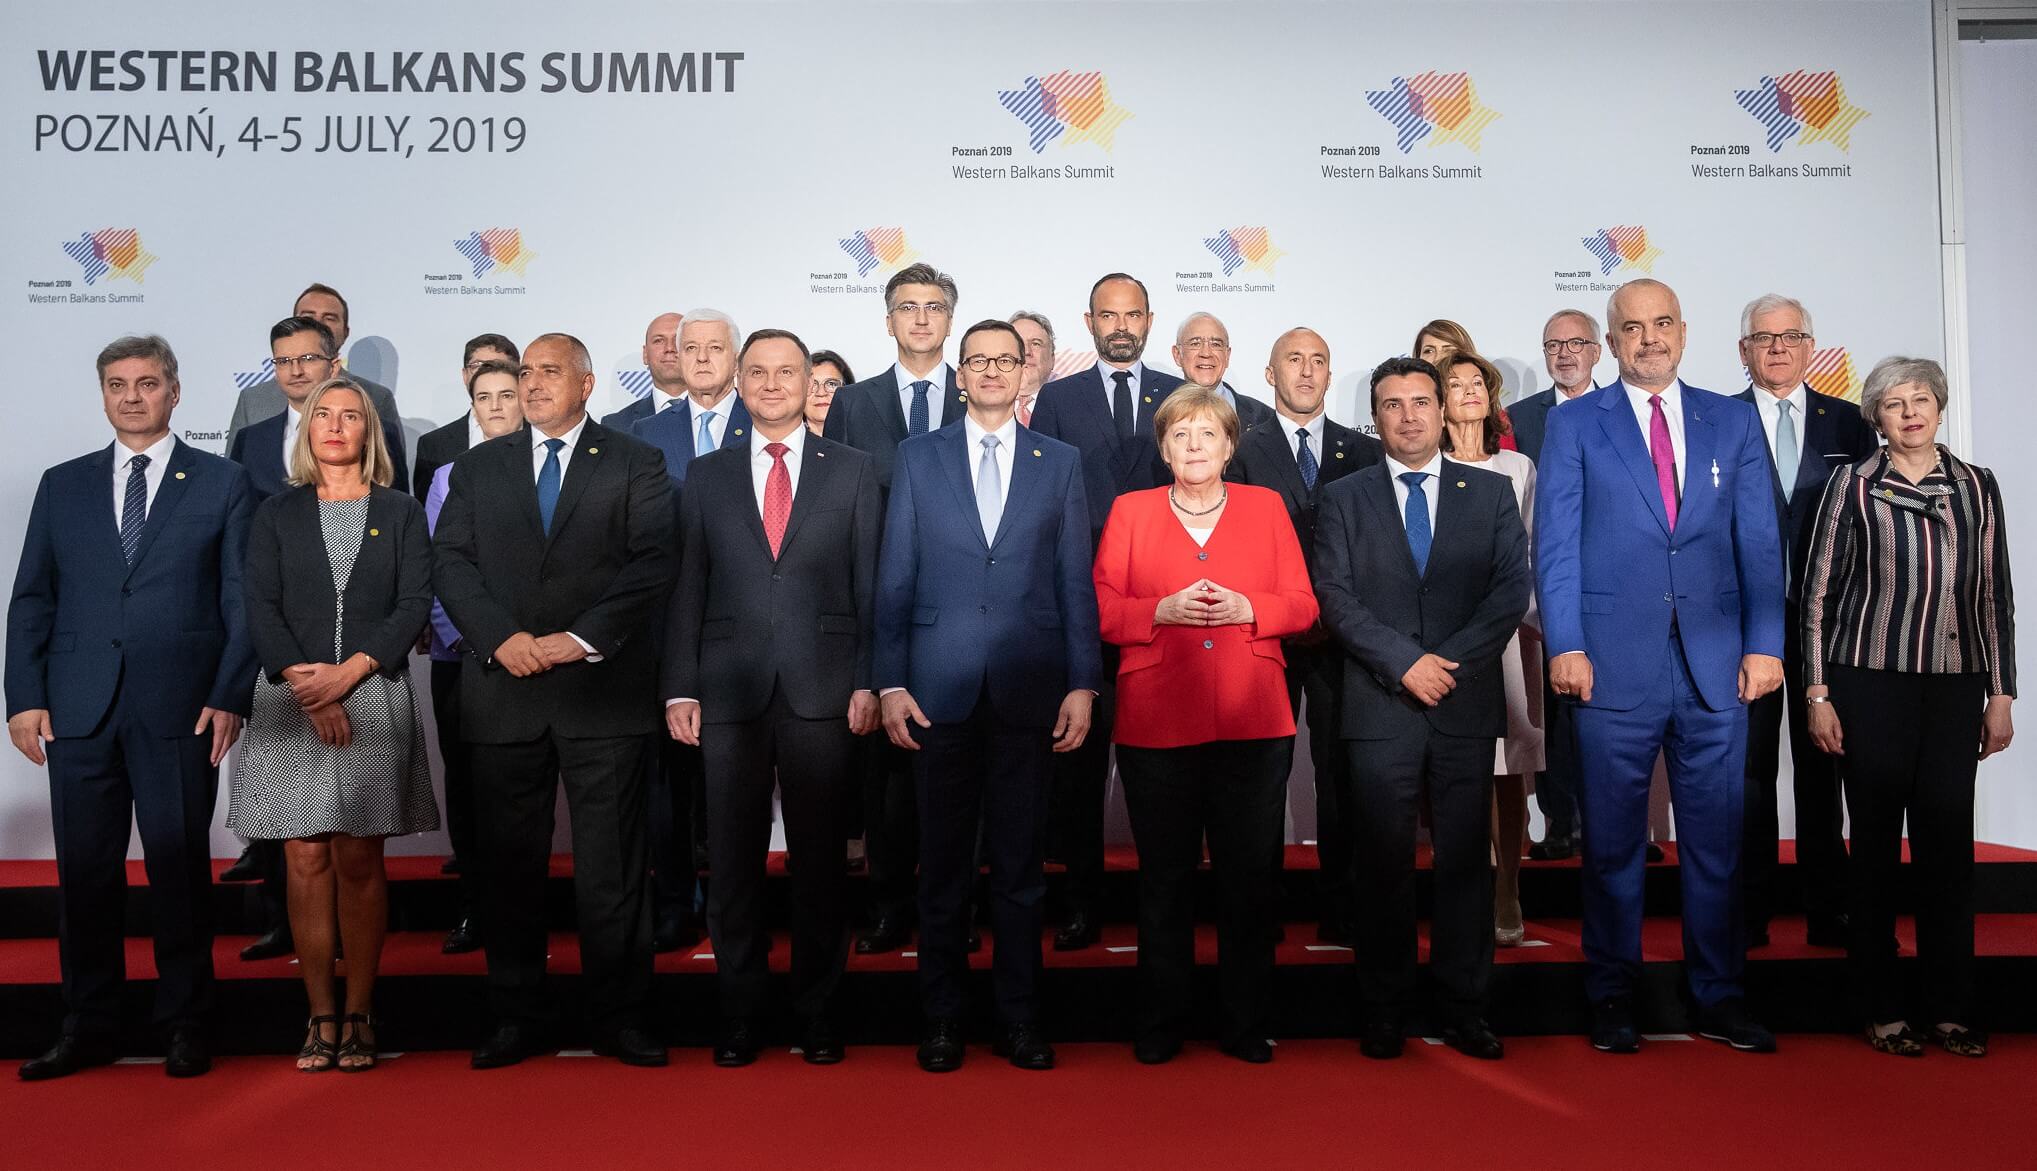 Western Balkans Summit 2019, Poznań, Poland. © Flickr / Ministry of Foreign Affairs of the Republic of Poland 